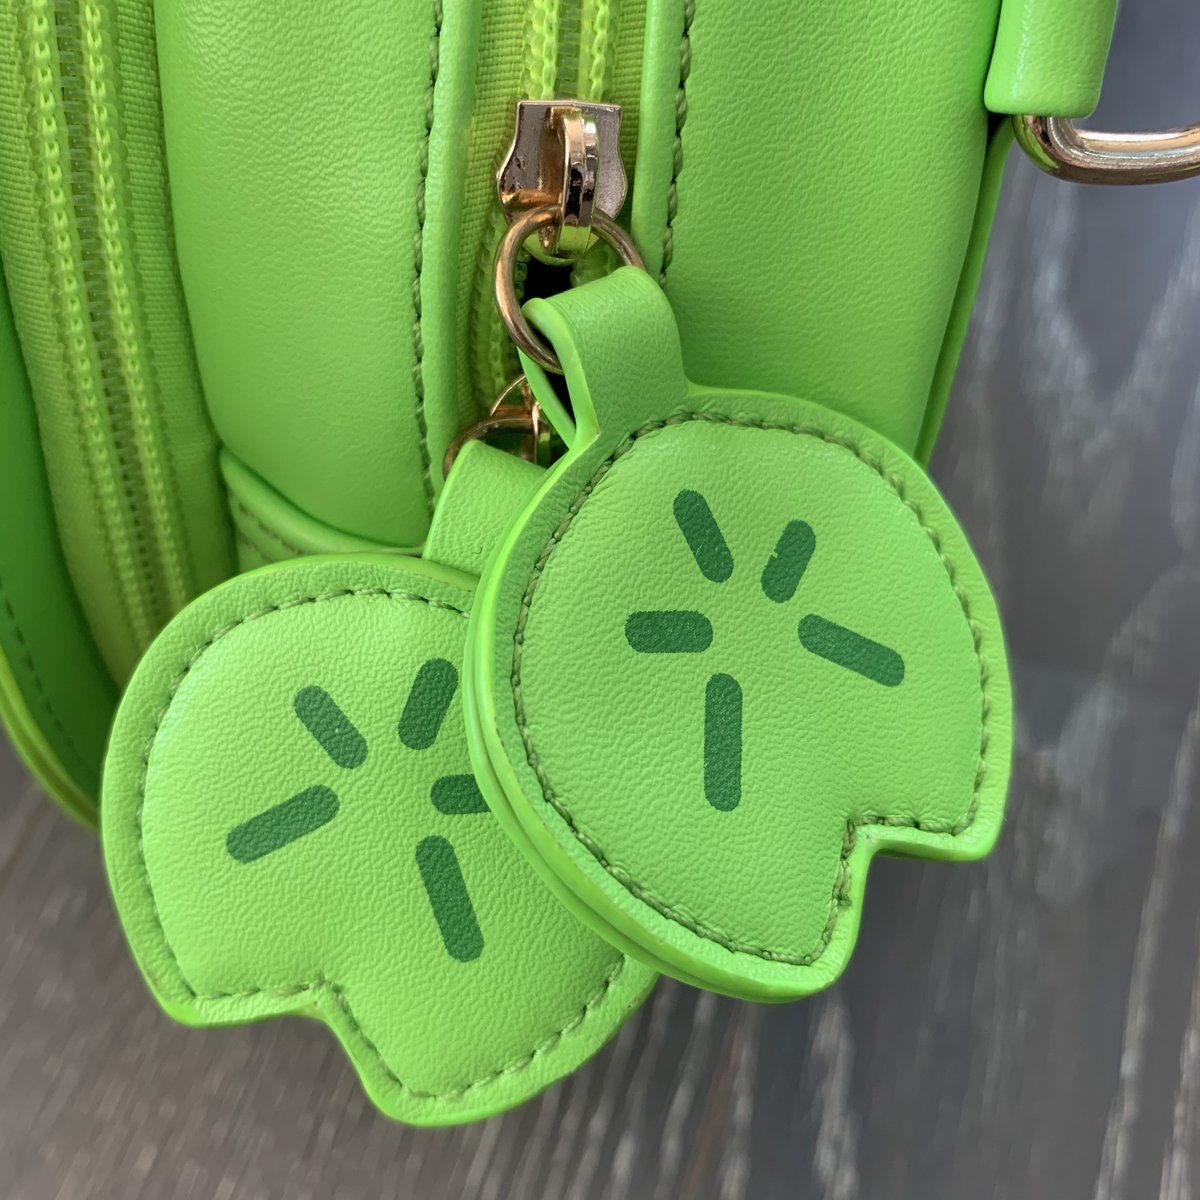 ♡ My Froggie Ita Bag Kickstarter officially launches in 1 WEEK! {FRIDAY, JULY 24} ♡ 🐸 I'm so happy with how the lily pad zippers came out!!